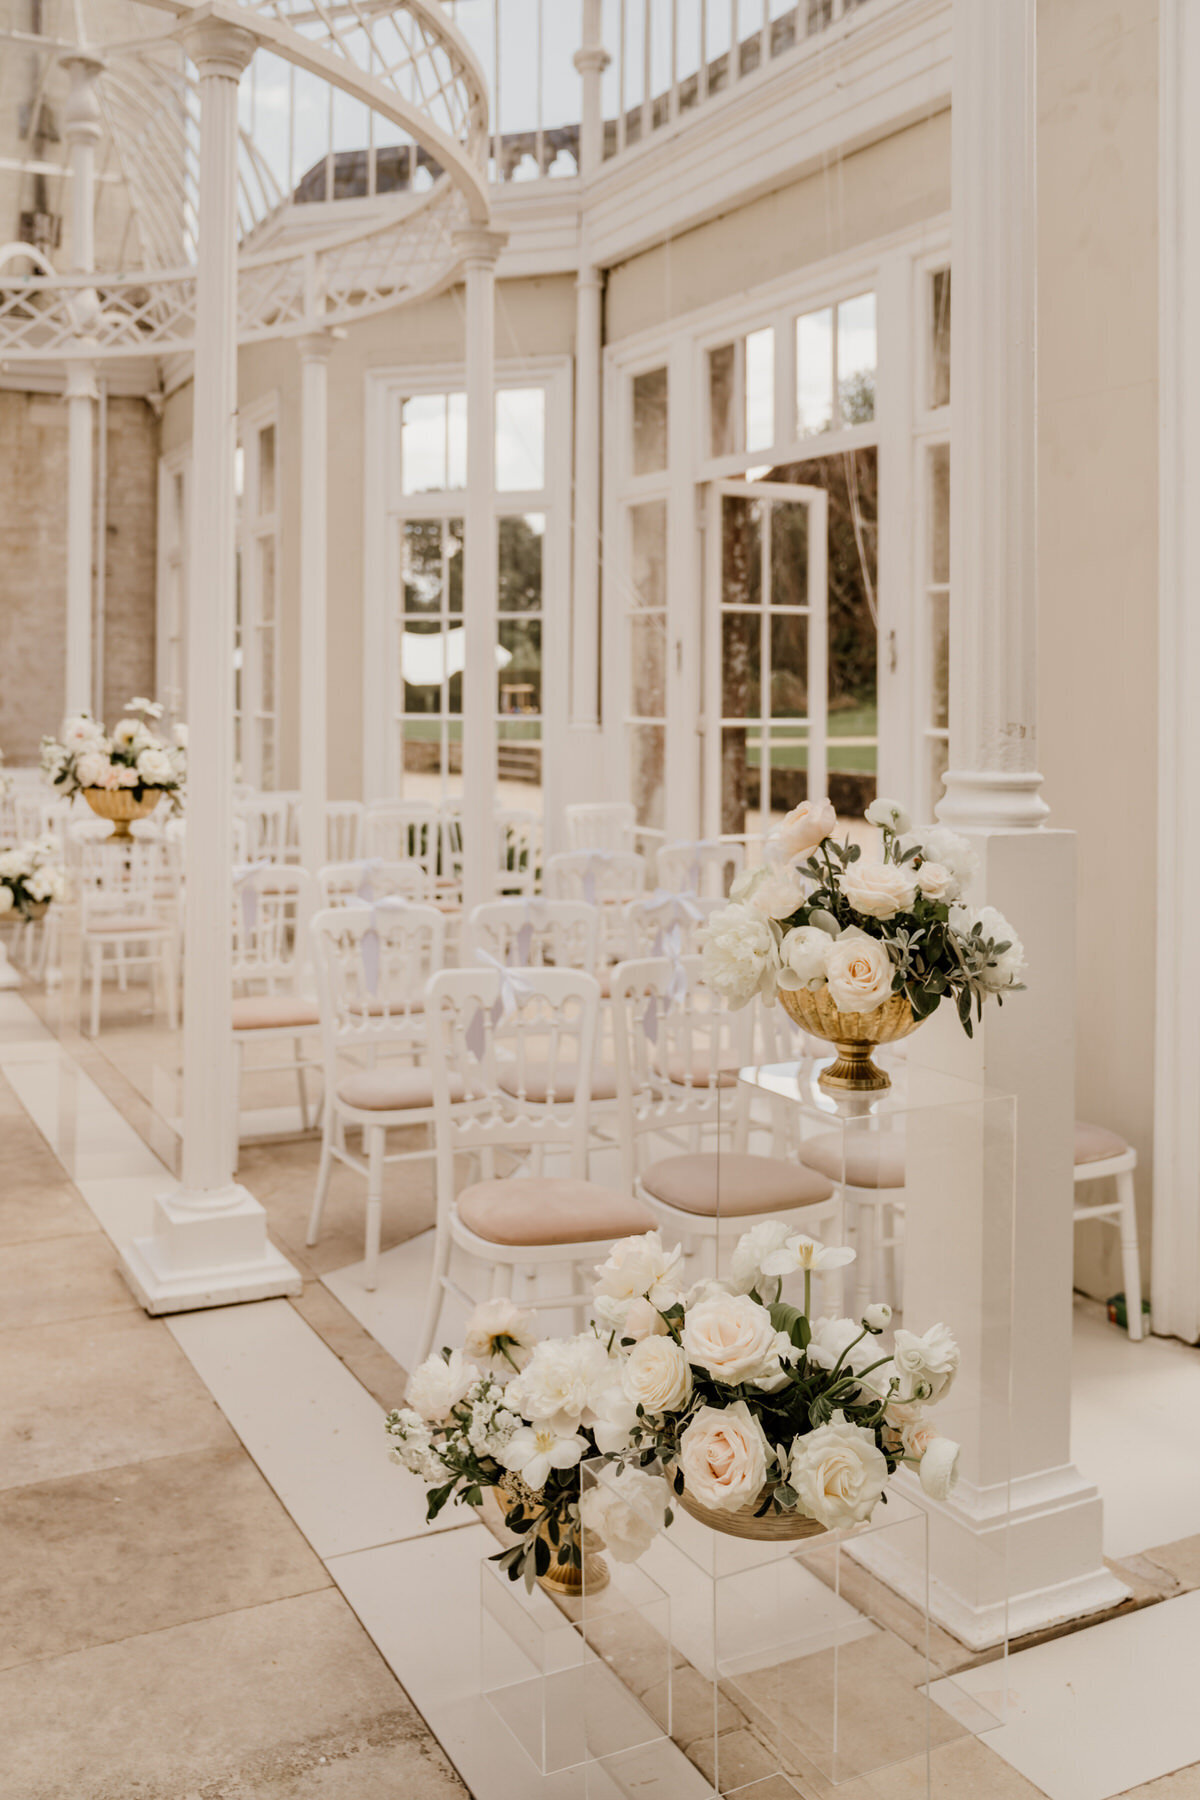 Interior of Domed Conservatory at came house wedding venue